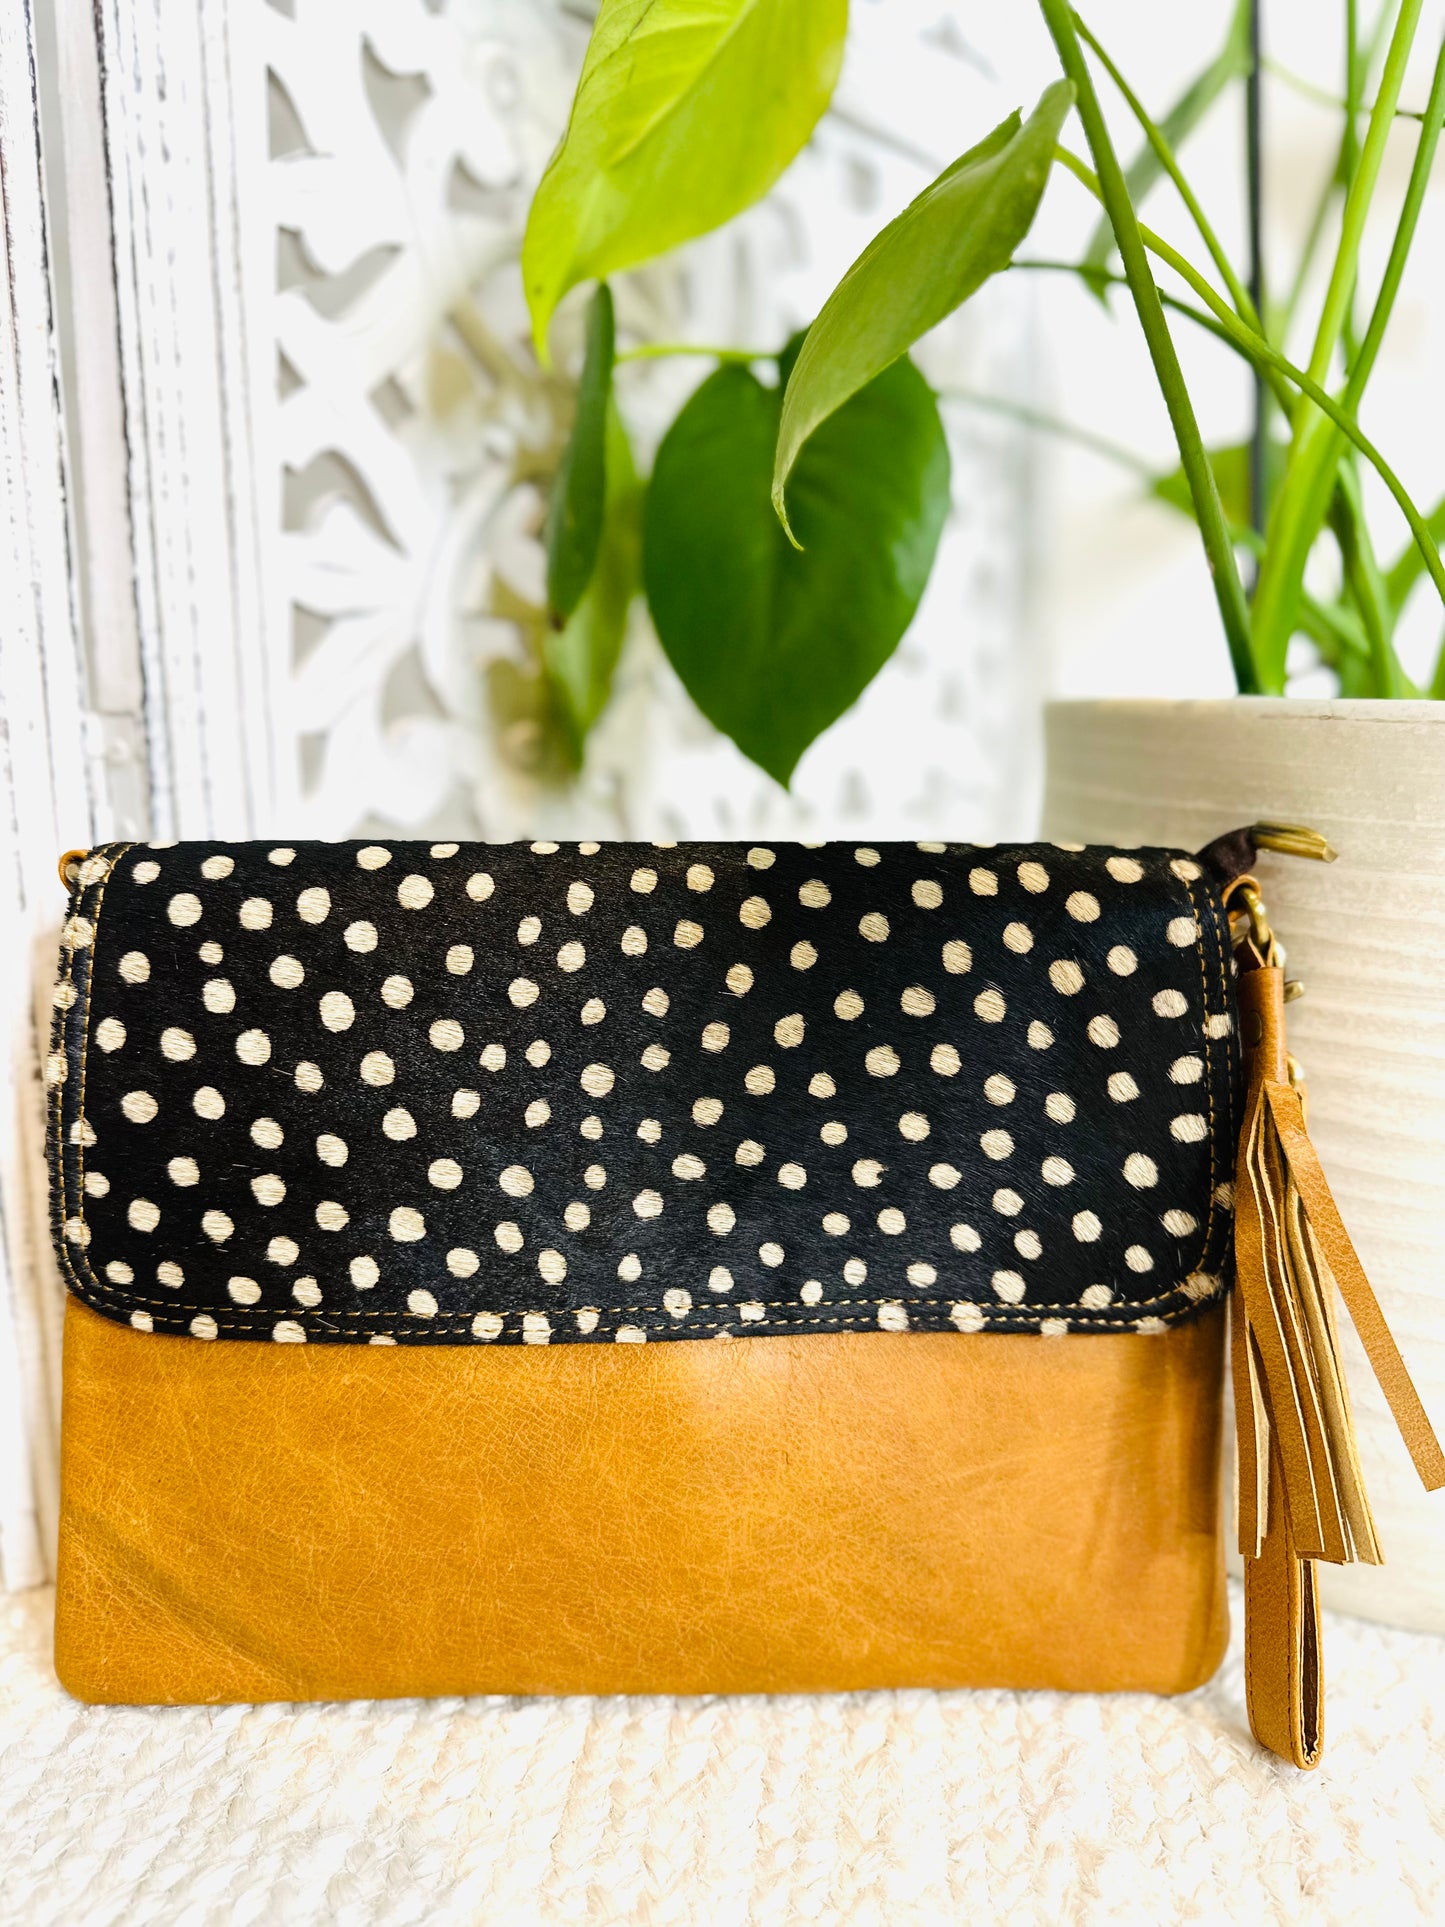 Spotted Tan large Animal Print Clutch